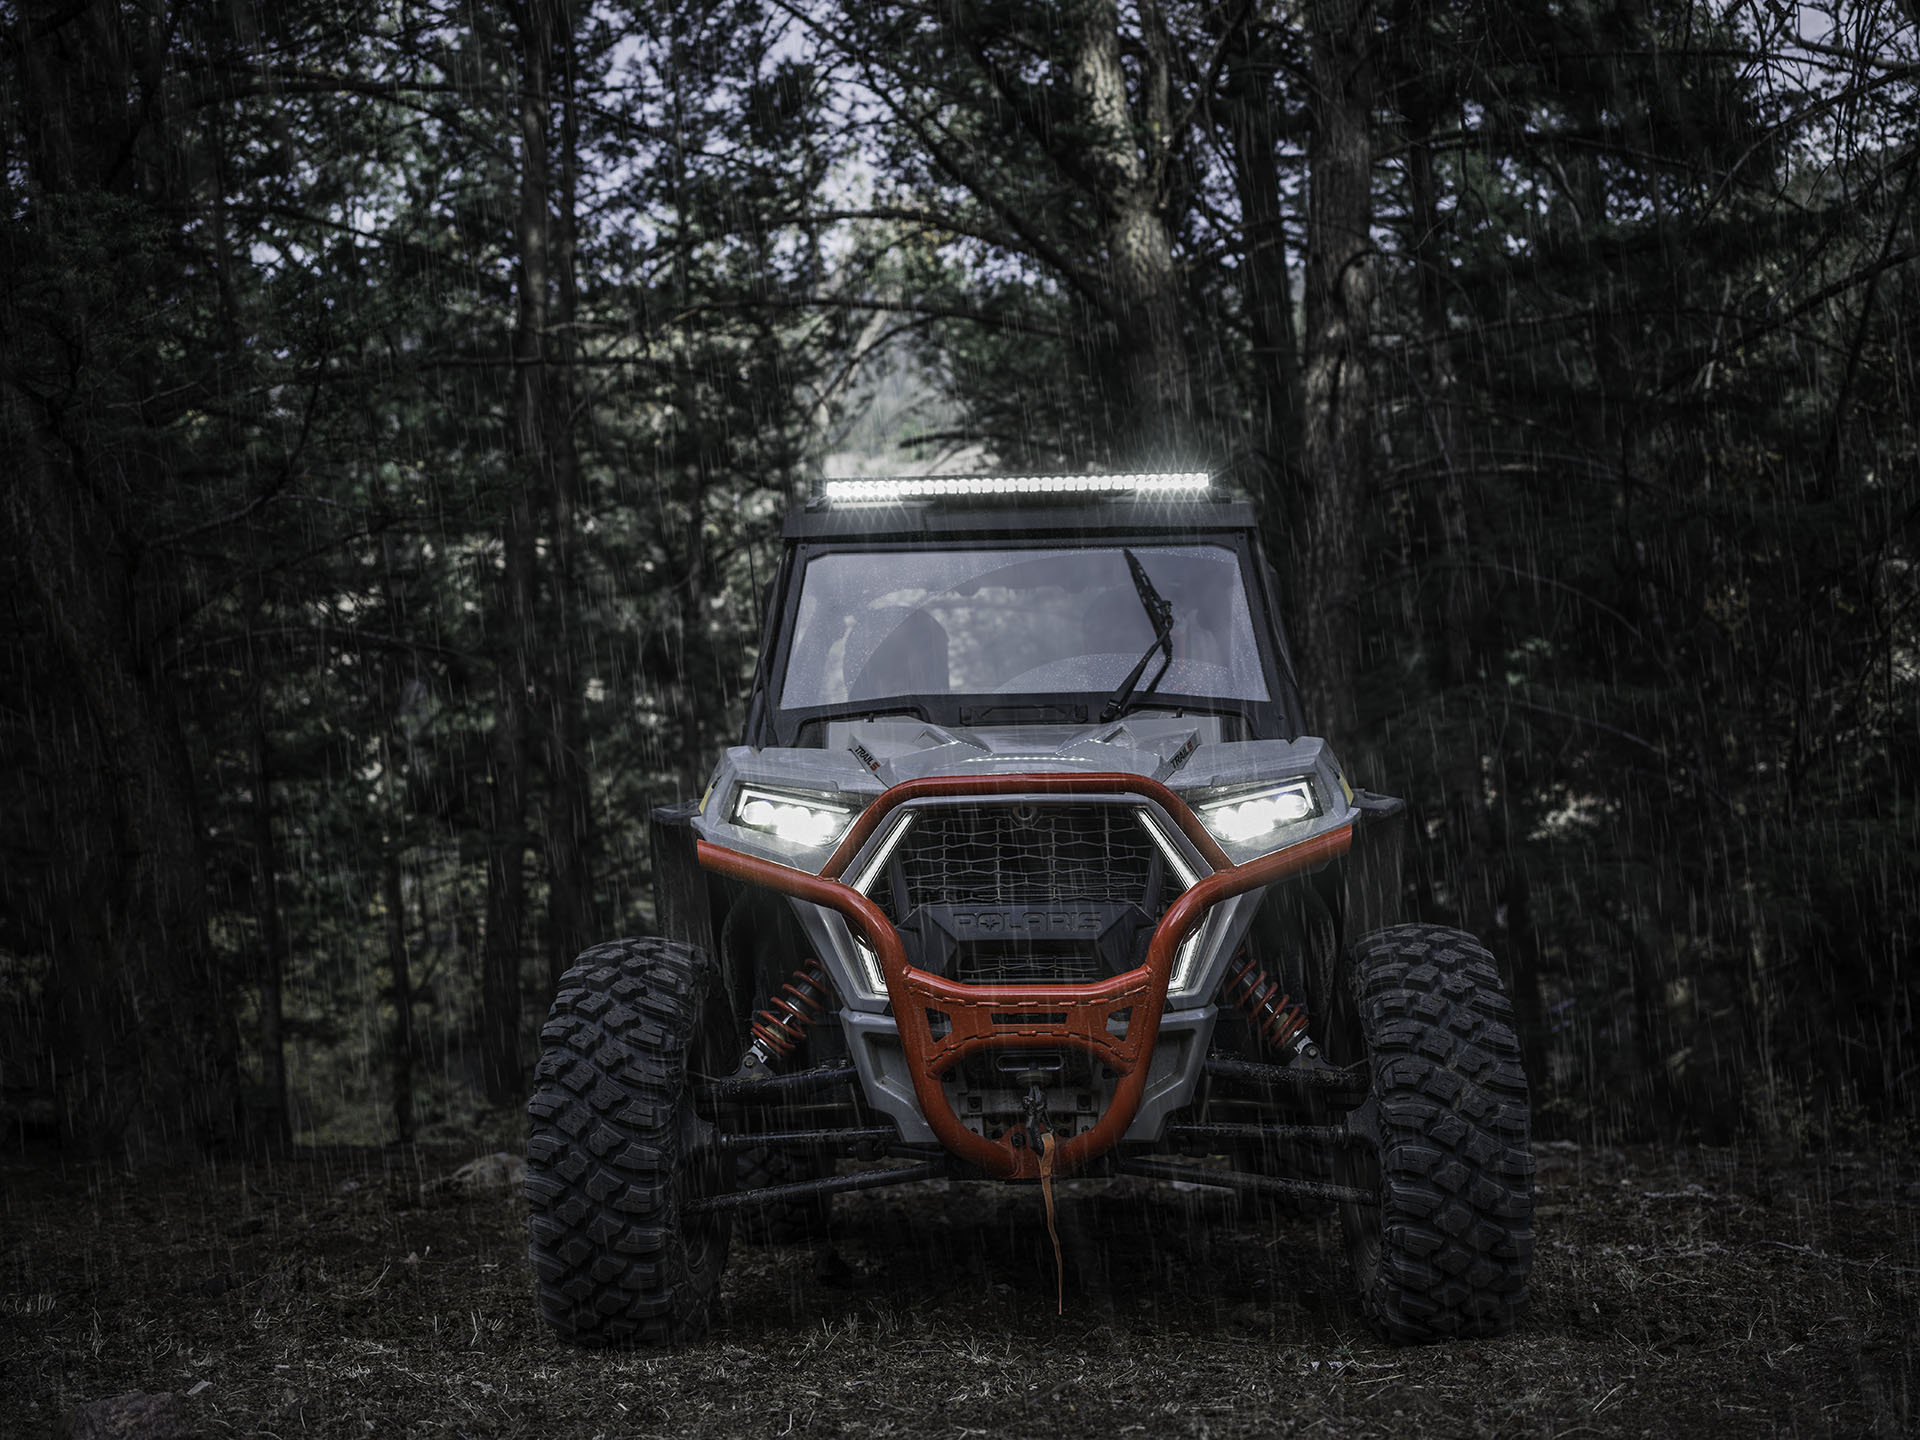 2023 Polaris RZR Trail S 1000 Ultimate in Ledgewood, New Jersey - Photo 13